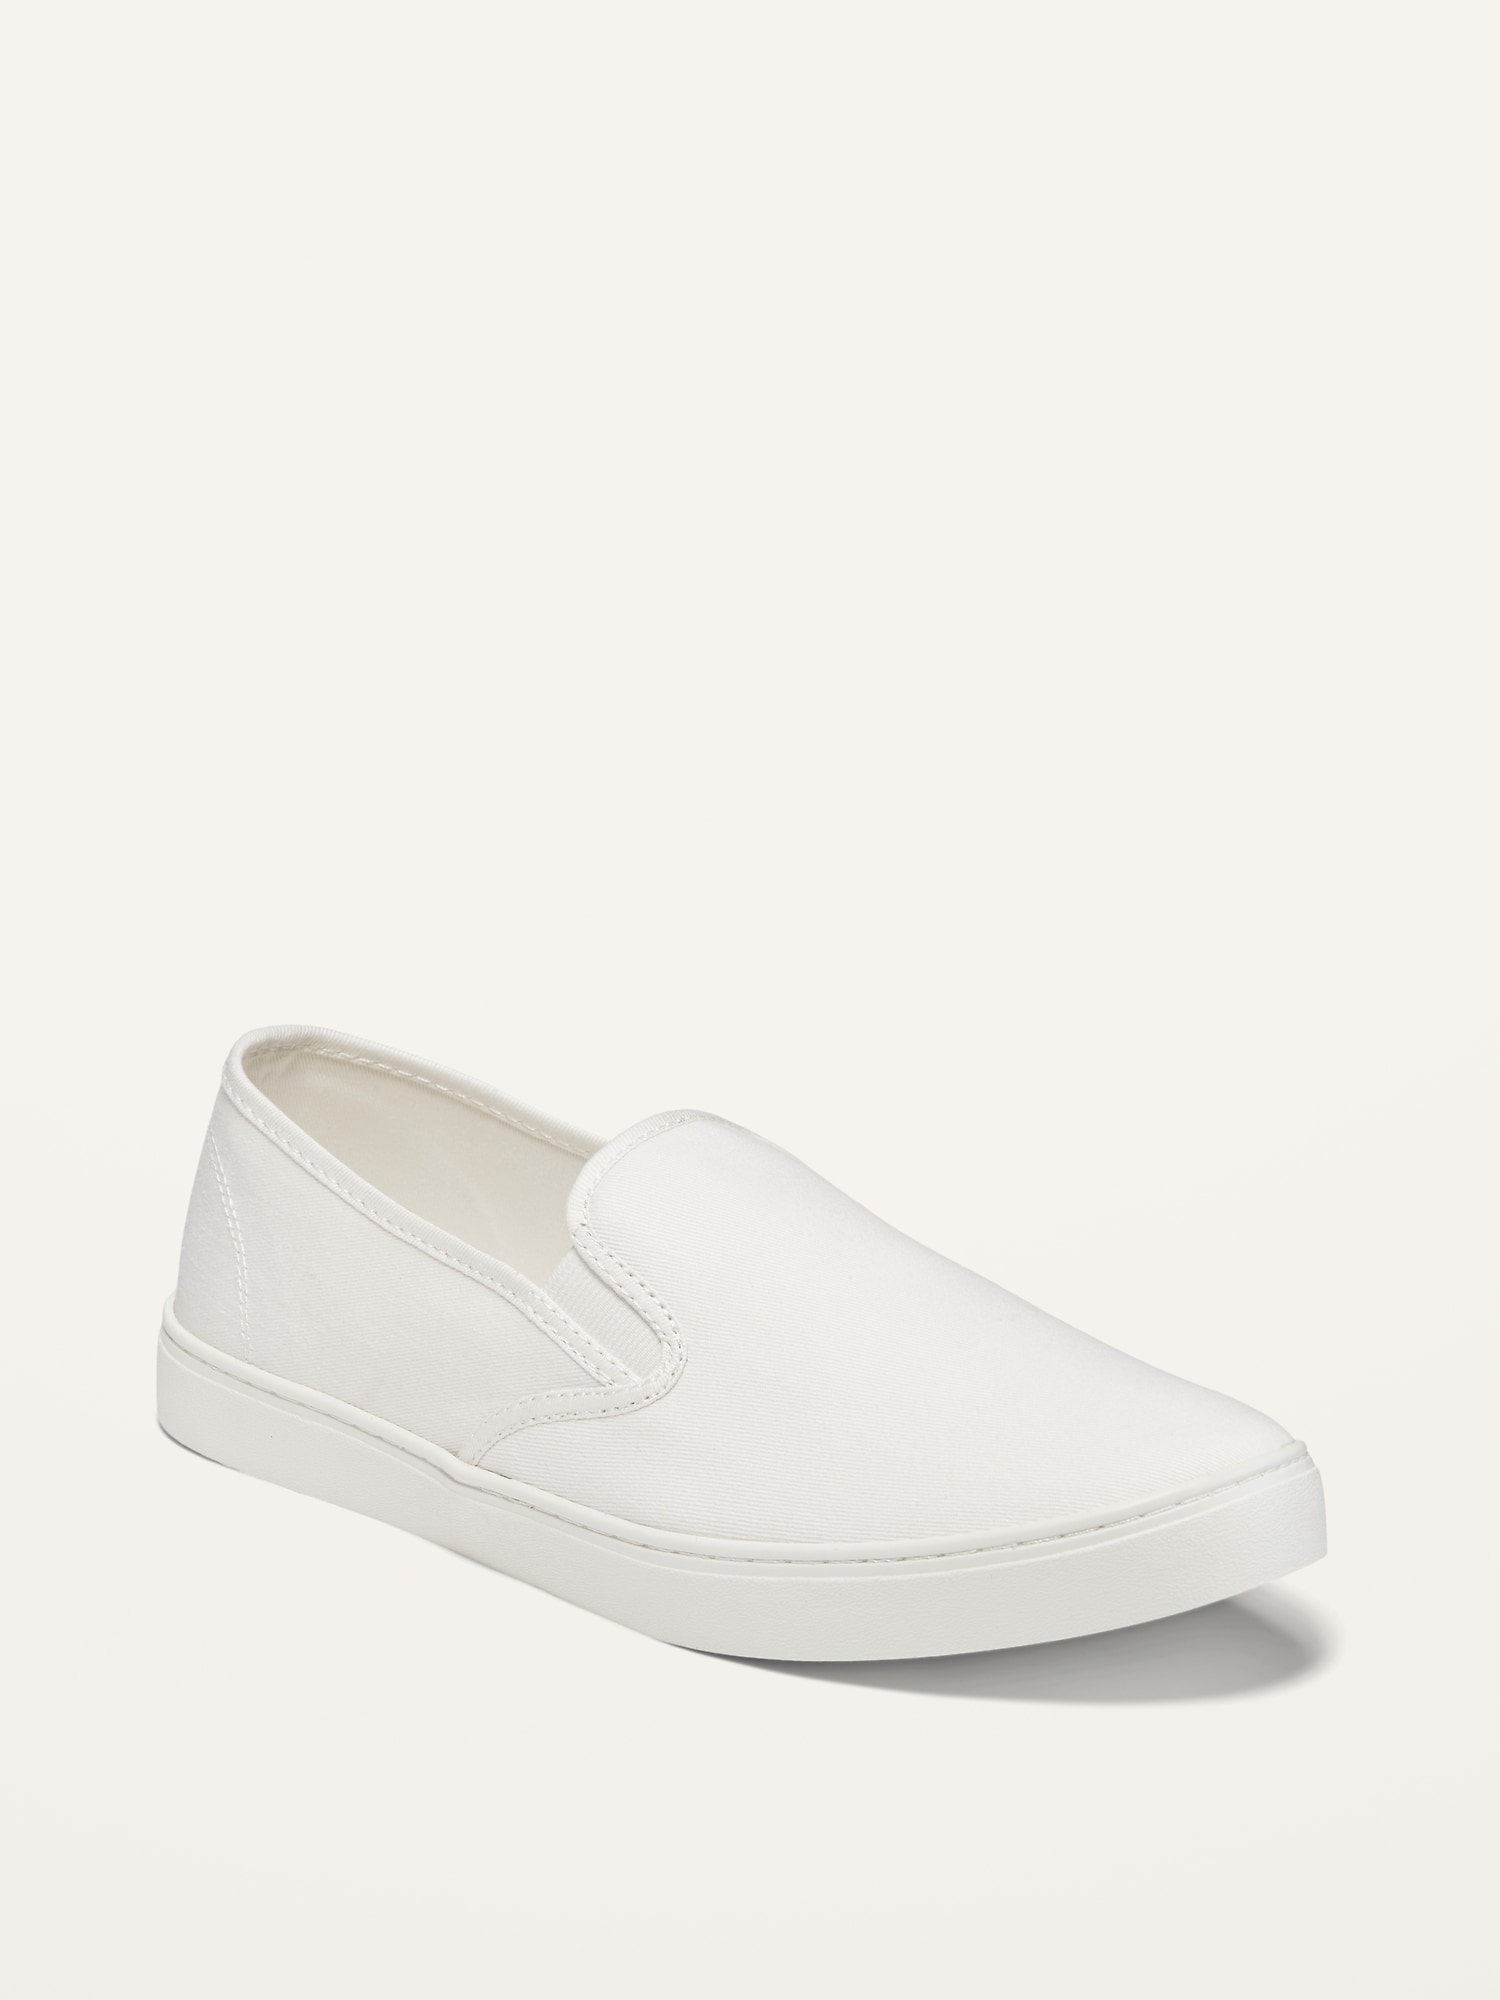 old navy slip on shoes